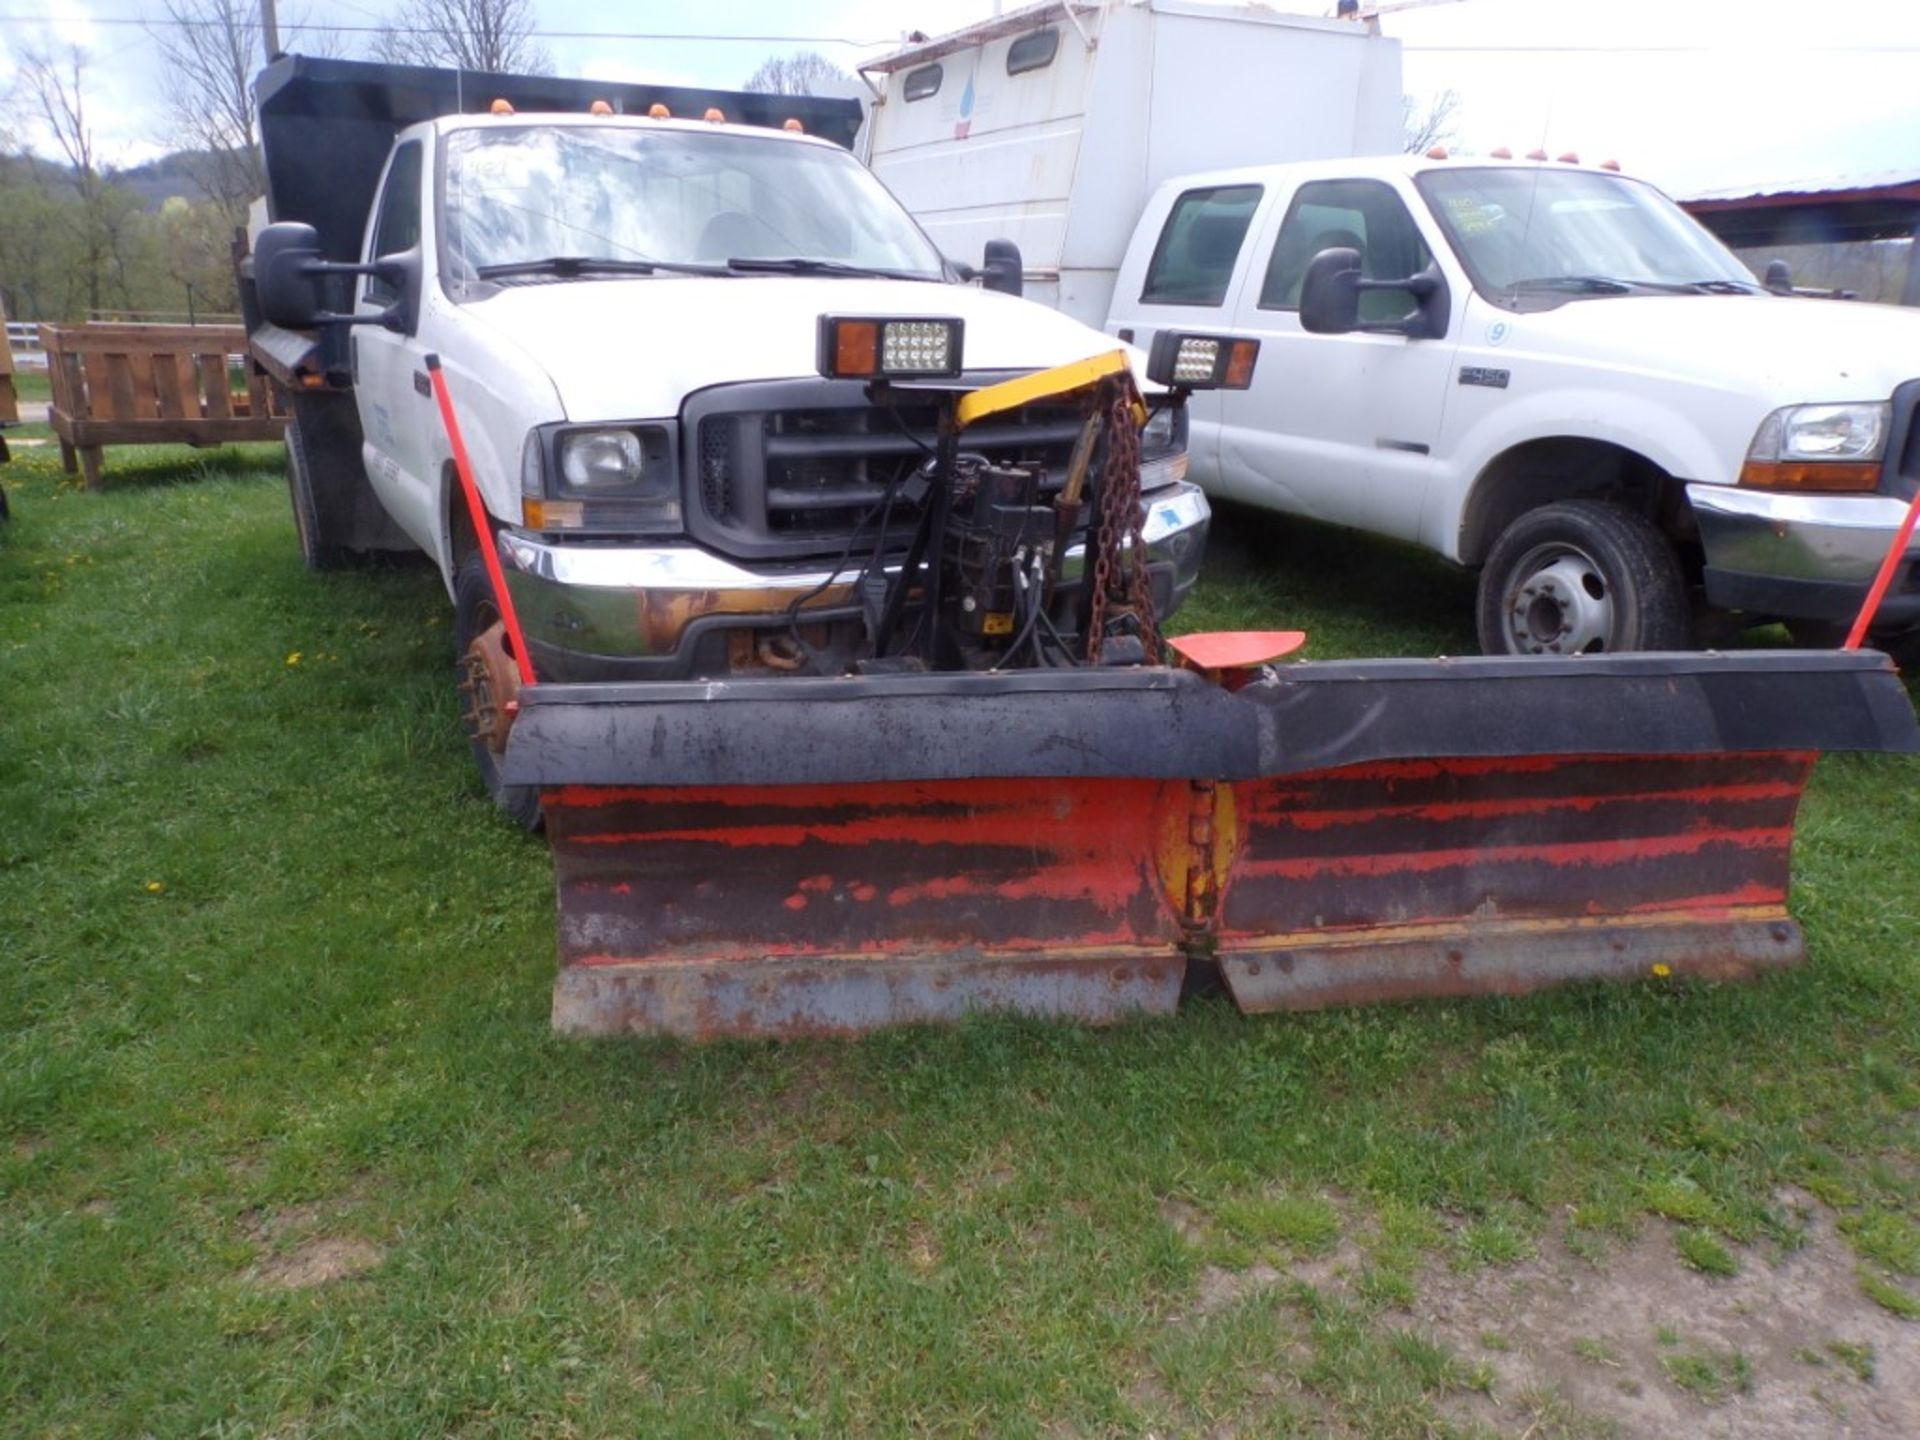 2004 Ford F550 Reg. Cab Dump Truck, 4 WD, Auto, Gas, EZ-V Plow by Fisher, Vin. # 1FDAF57S14ED46294 - - Image 2 of 6